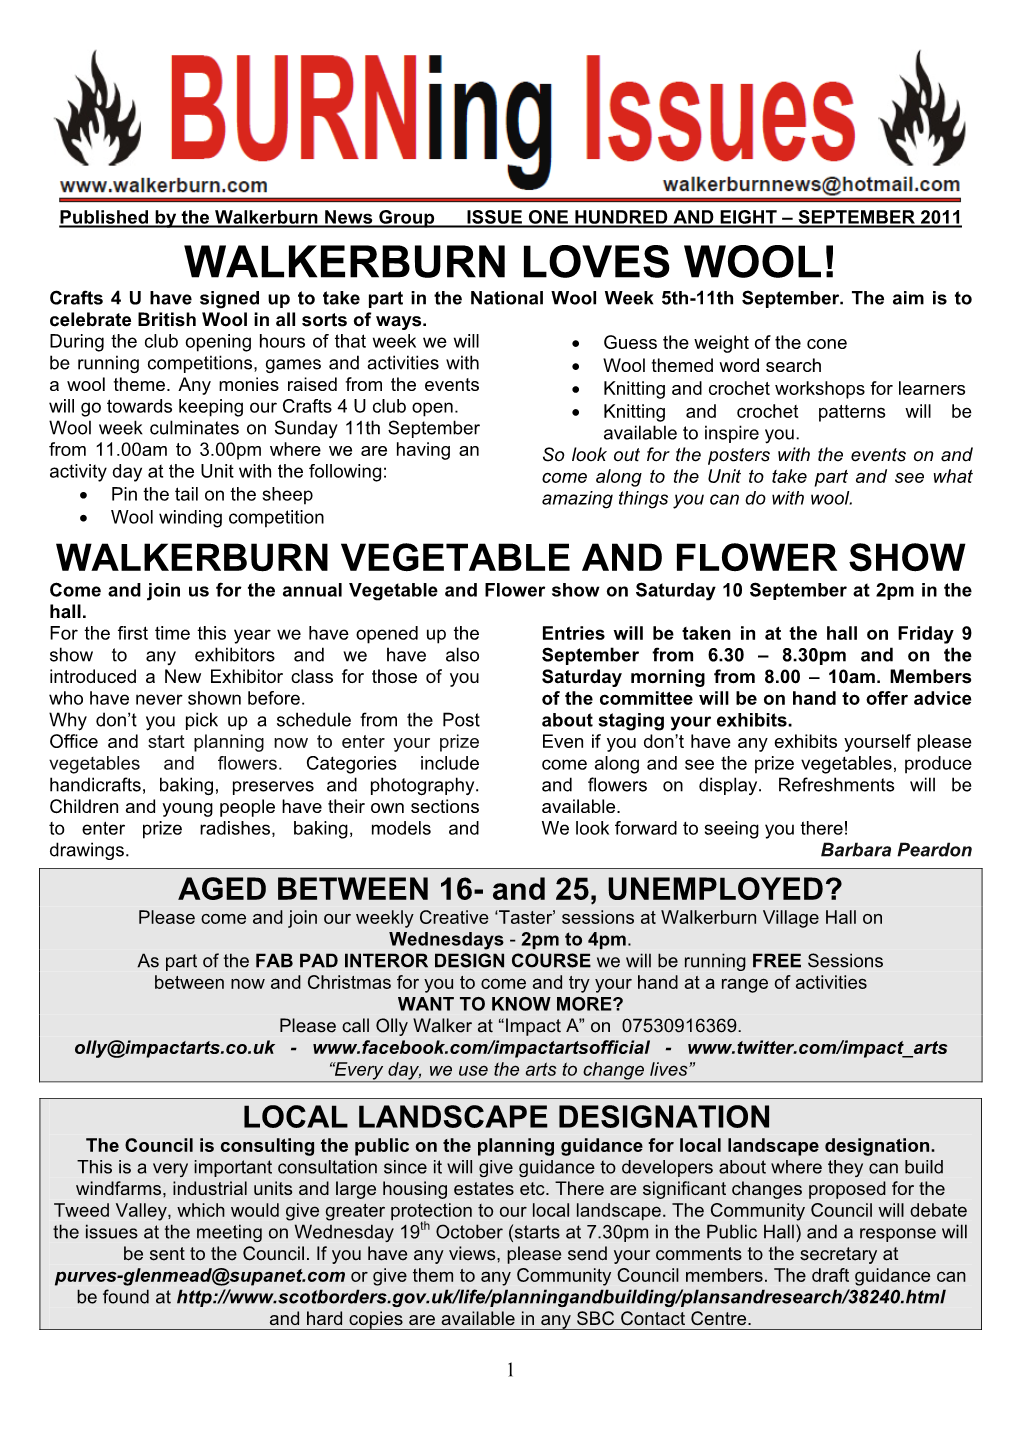 WALKERBURN LOVES WOOL! Crafts 4 U Have Signed up to Take Part in the National Wool Week 5Th-11Th September